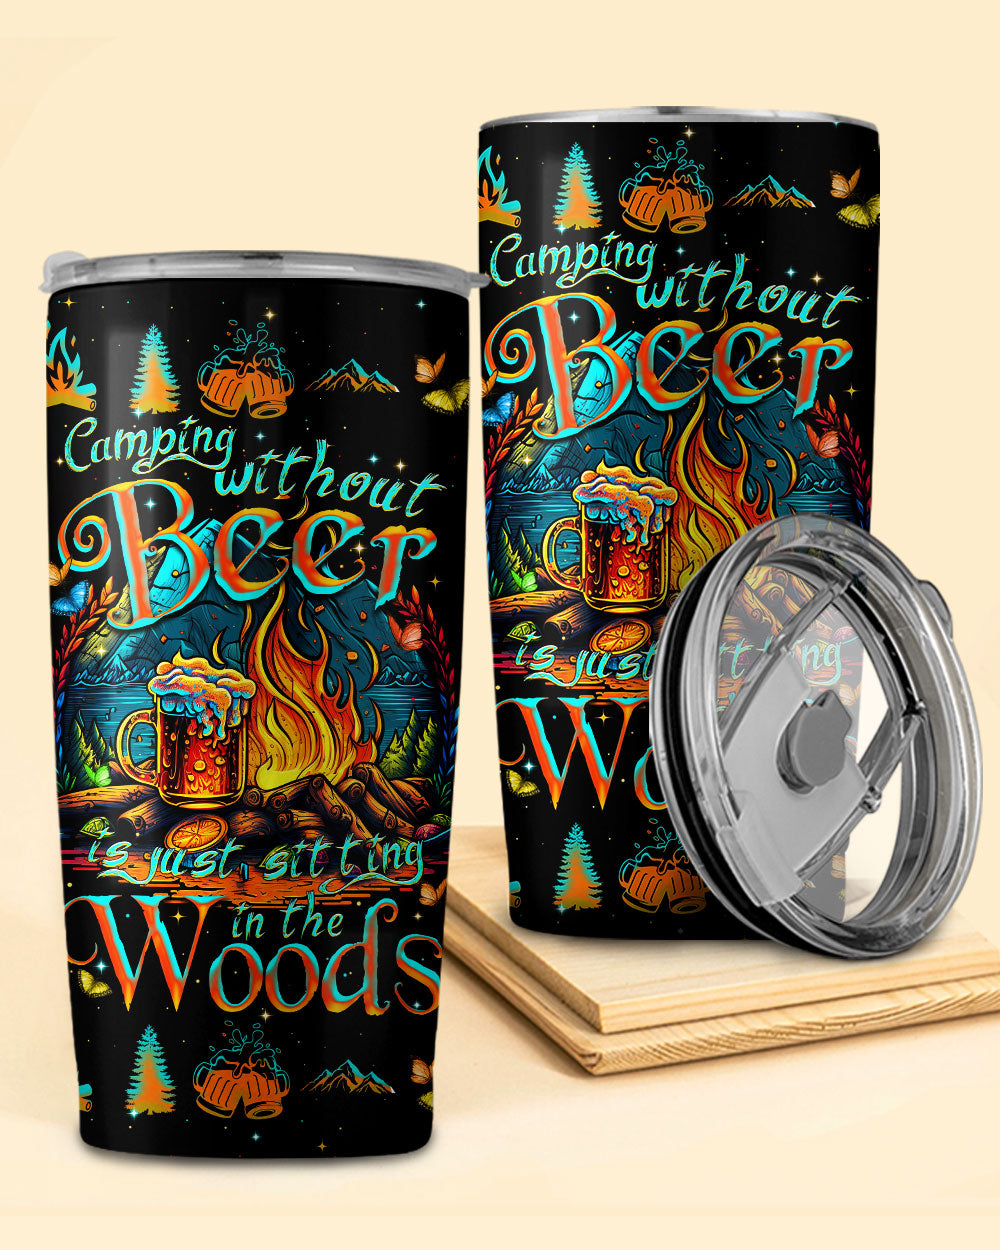 CAMPING WITHOUT BEER IS JUST SITTING IN THE WOODS TUMBLER - TYTM2704233